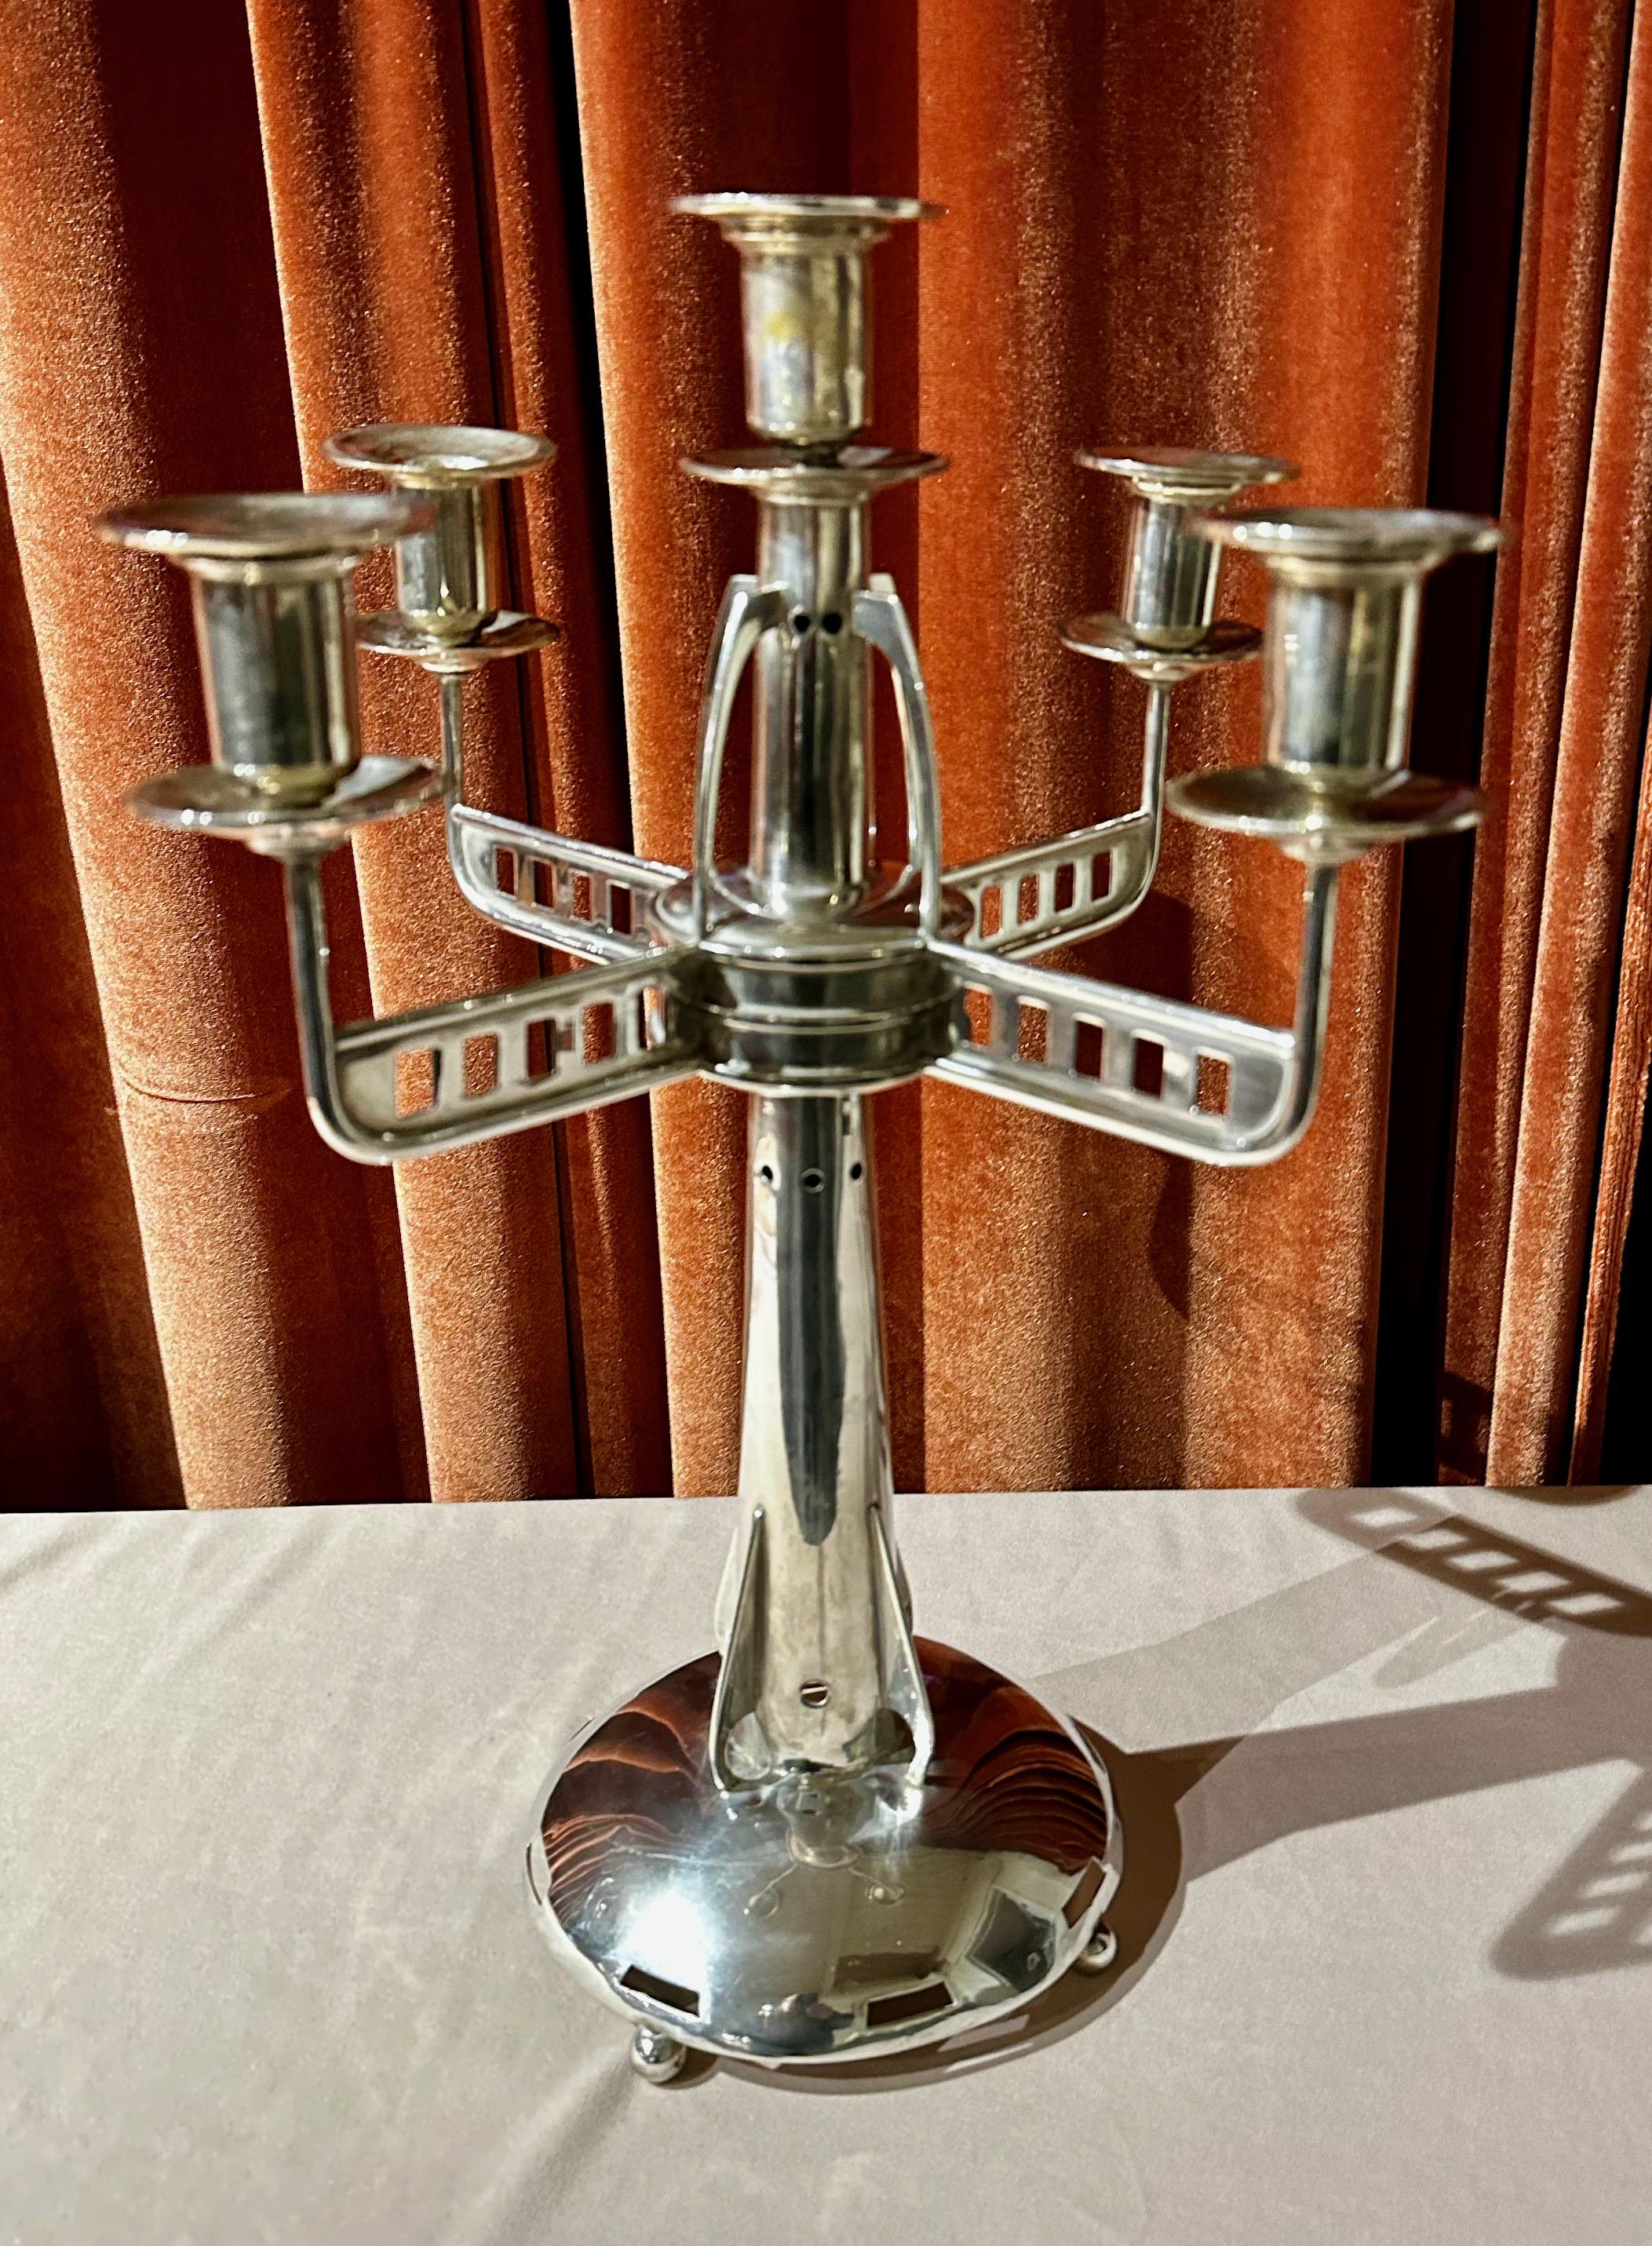 Austrian Vienna Secession silver candelabra Circa 1910. This massive and sculptural design is silver with the Austrian maker mark HS and of the head of Diana. Over 1050 grams of silver. Fantastic design and it is scarce to see any work of this size